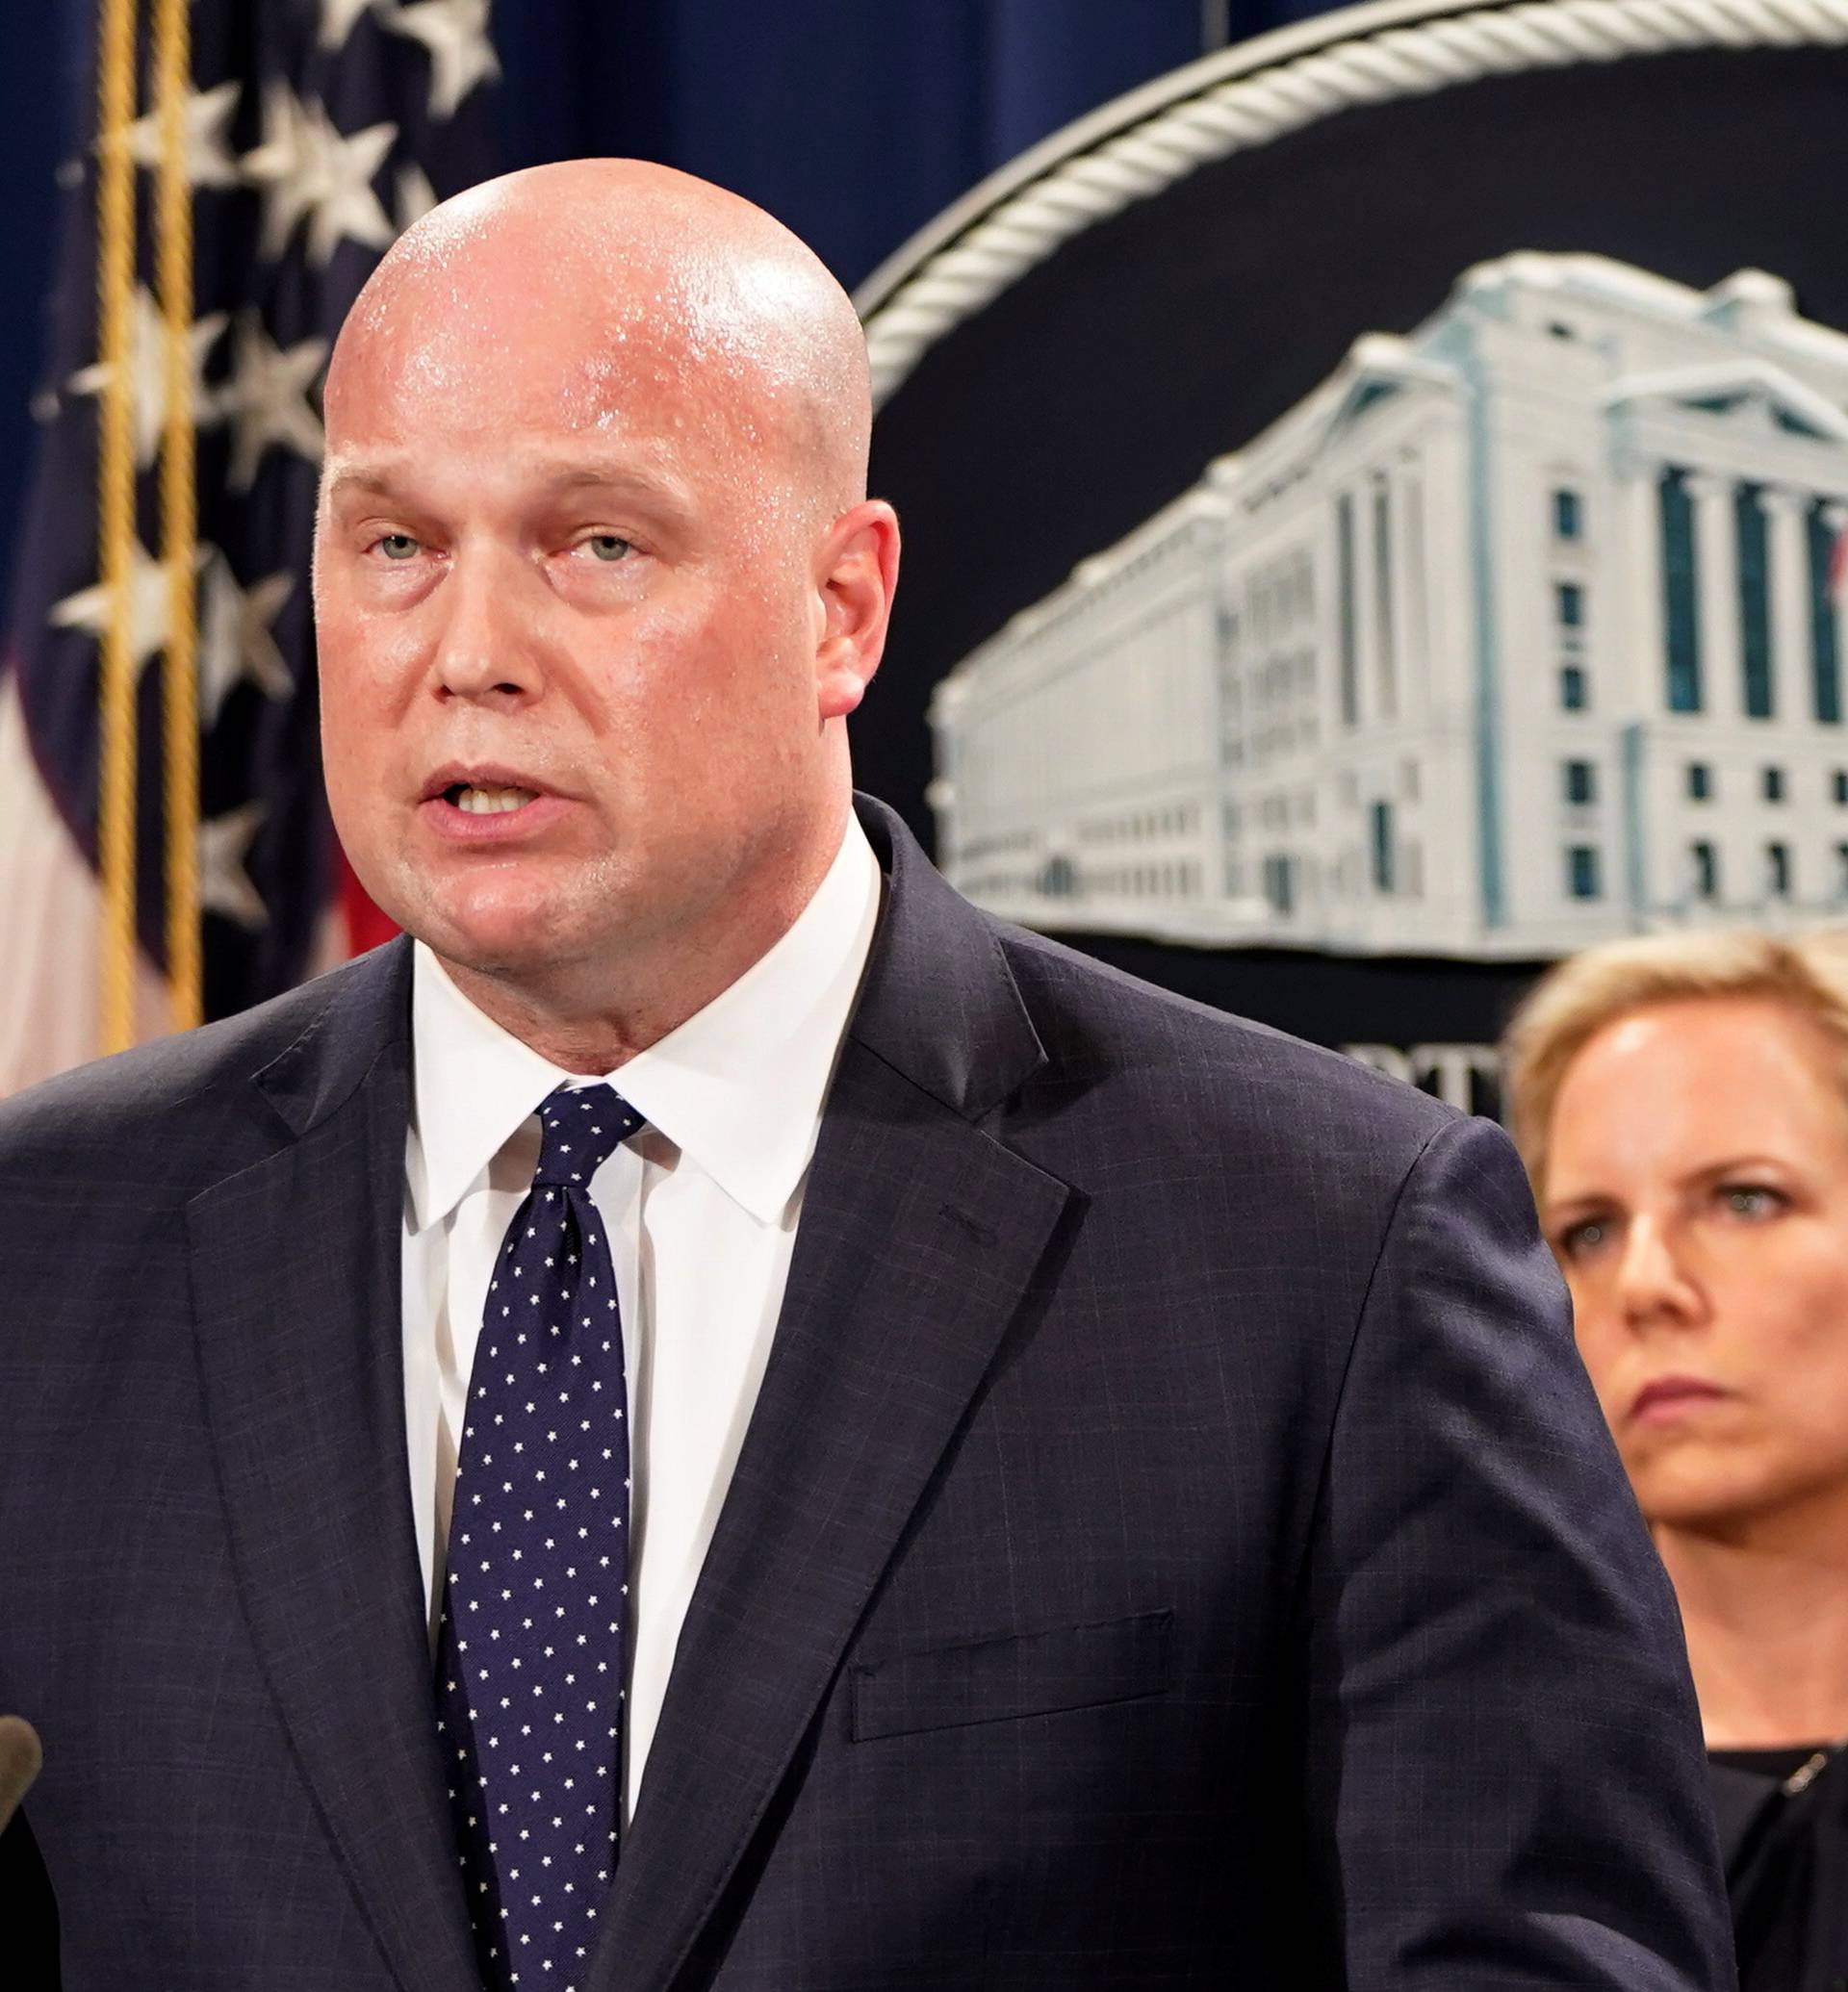 Acting Attorney General Matthew Whitaker and officials hold news conference to announce indictments against China's Huawei Technologies in Washington